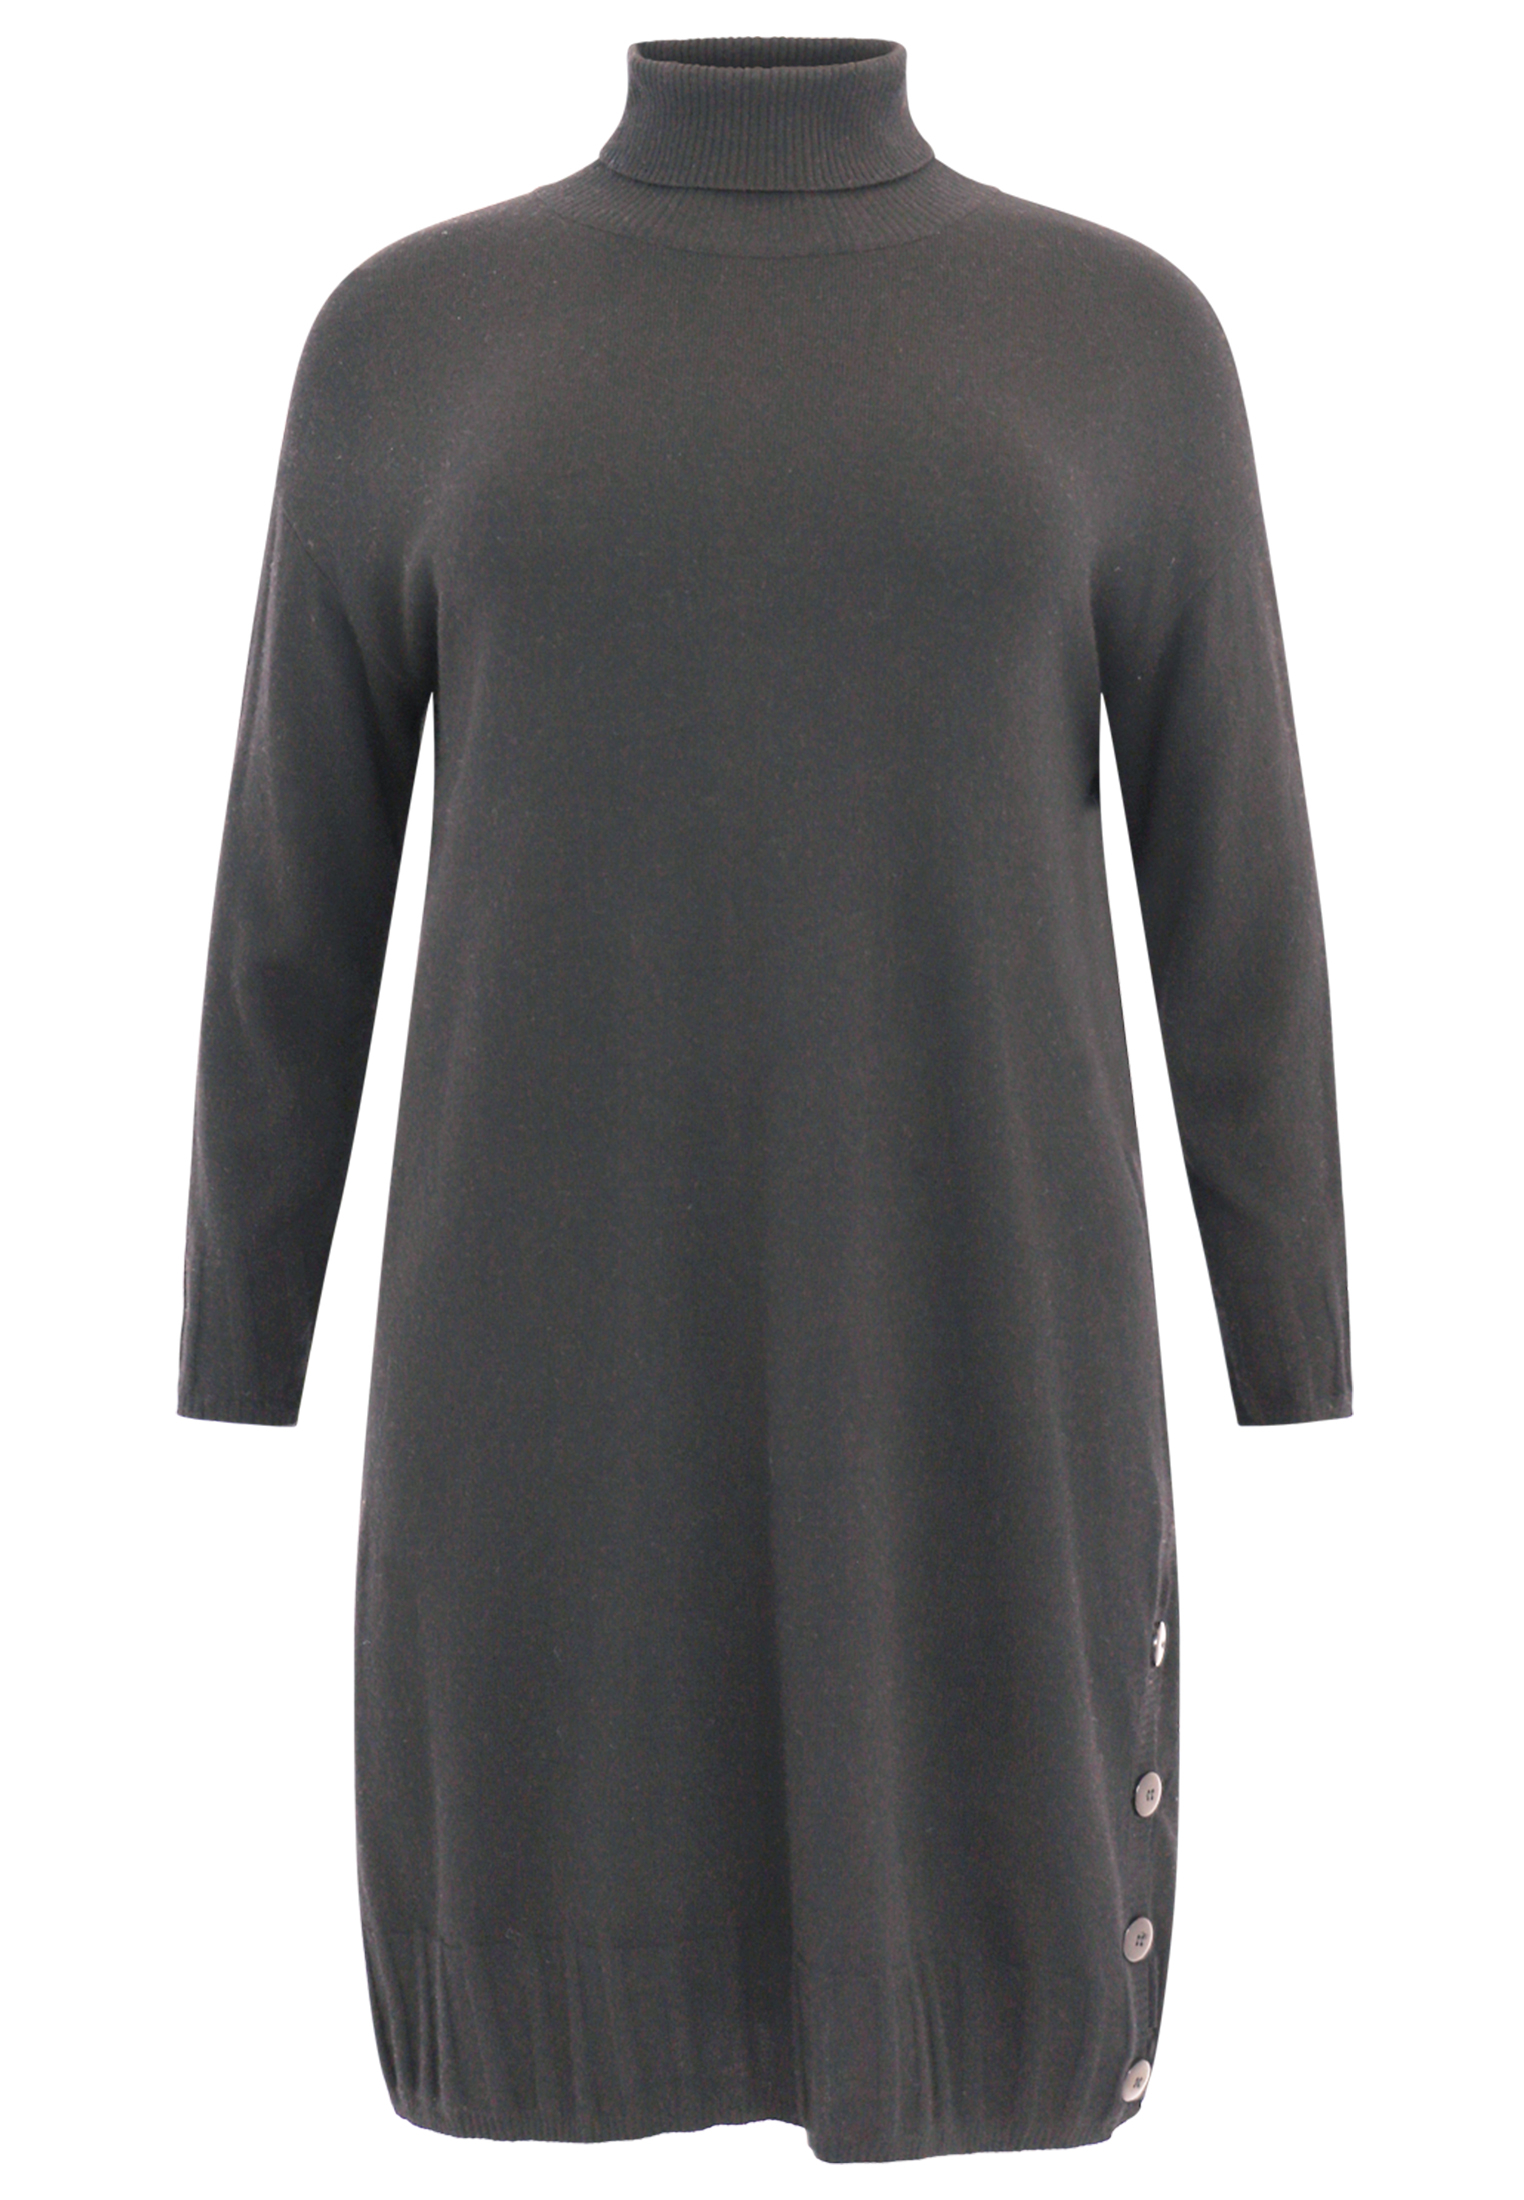 Dress high neck knitted - black grey brown